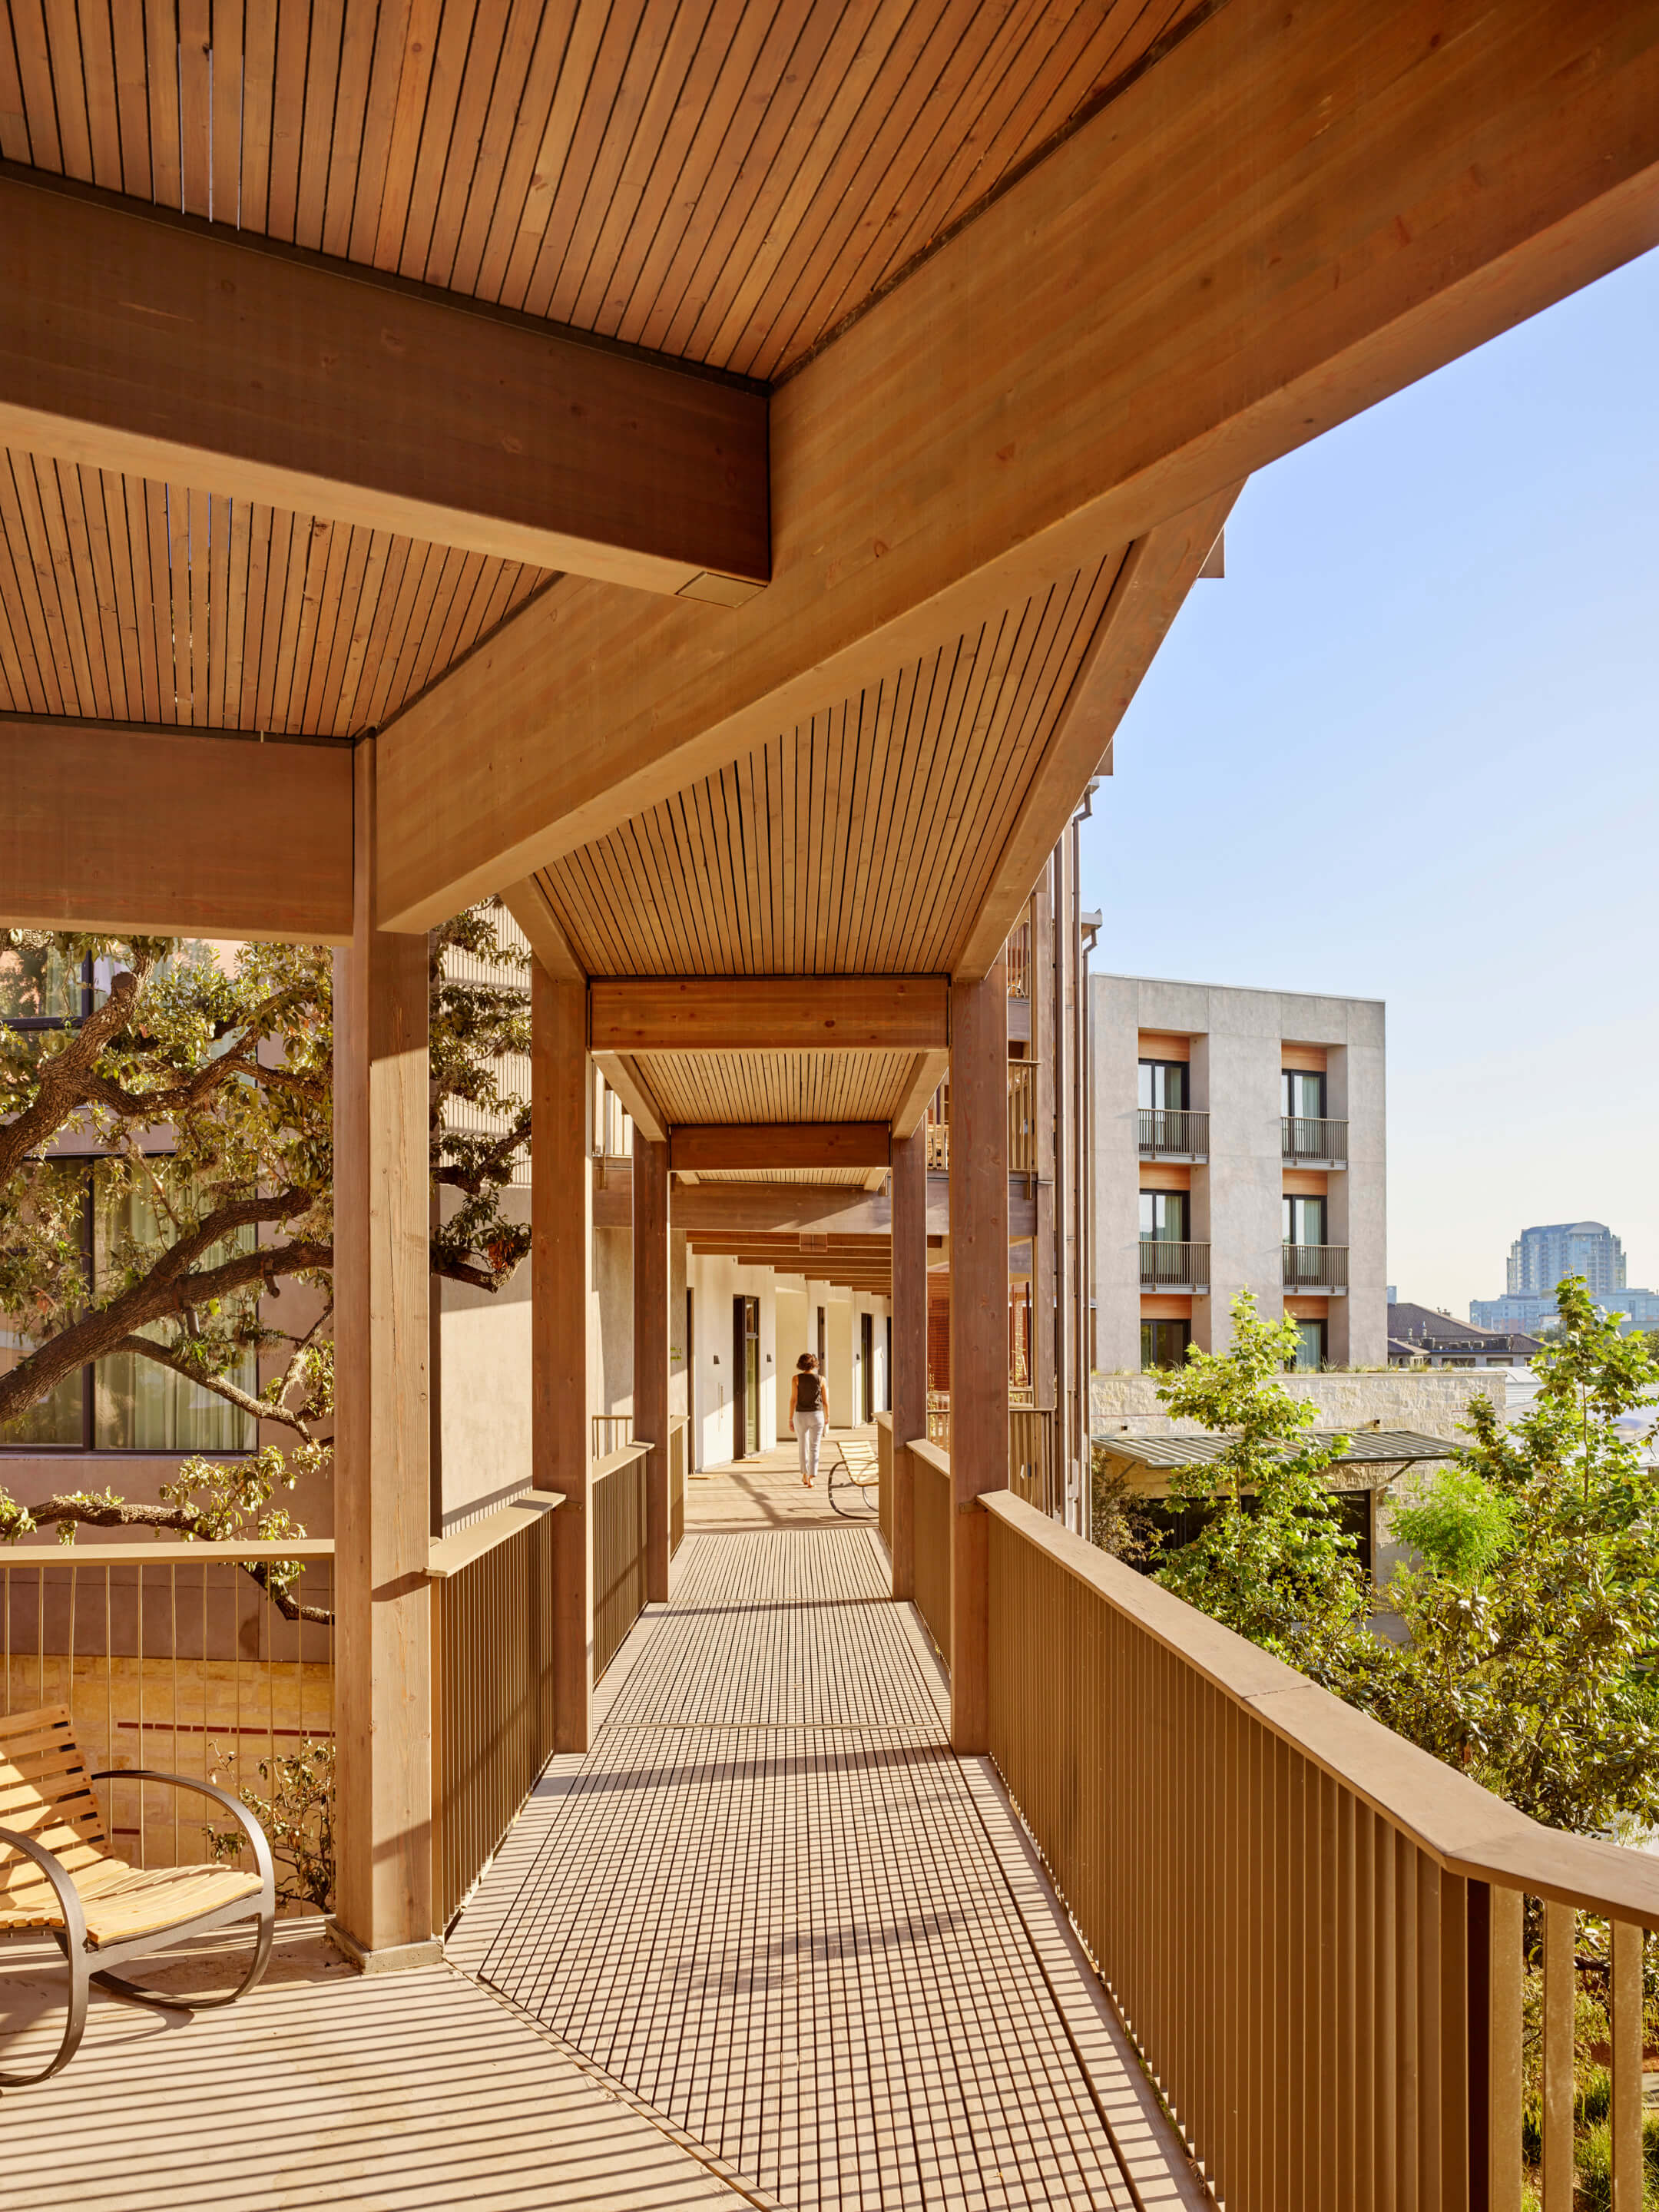 Vertical photo of a hotel with timber flooring and walkways